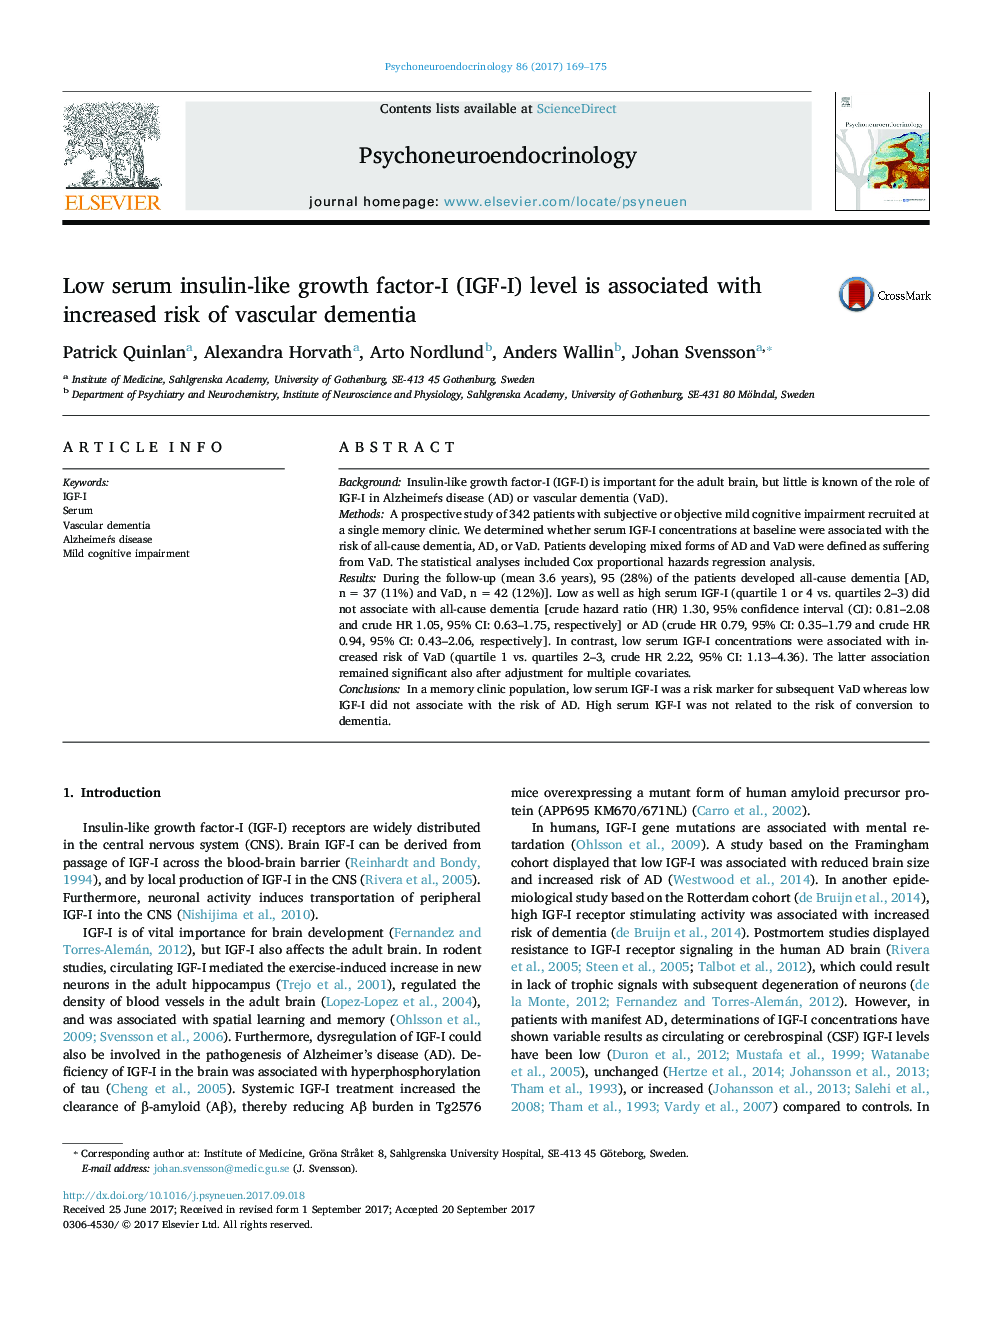 Low serum insulin-like growth factor-I (IGF-I) level is associated with increased risk of vascular dementia